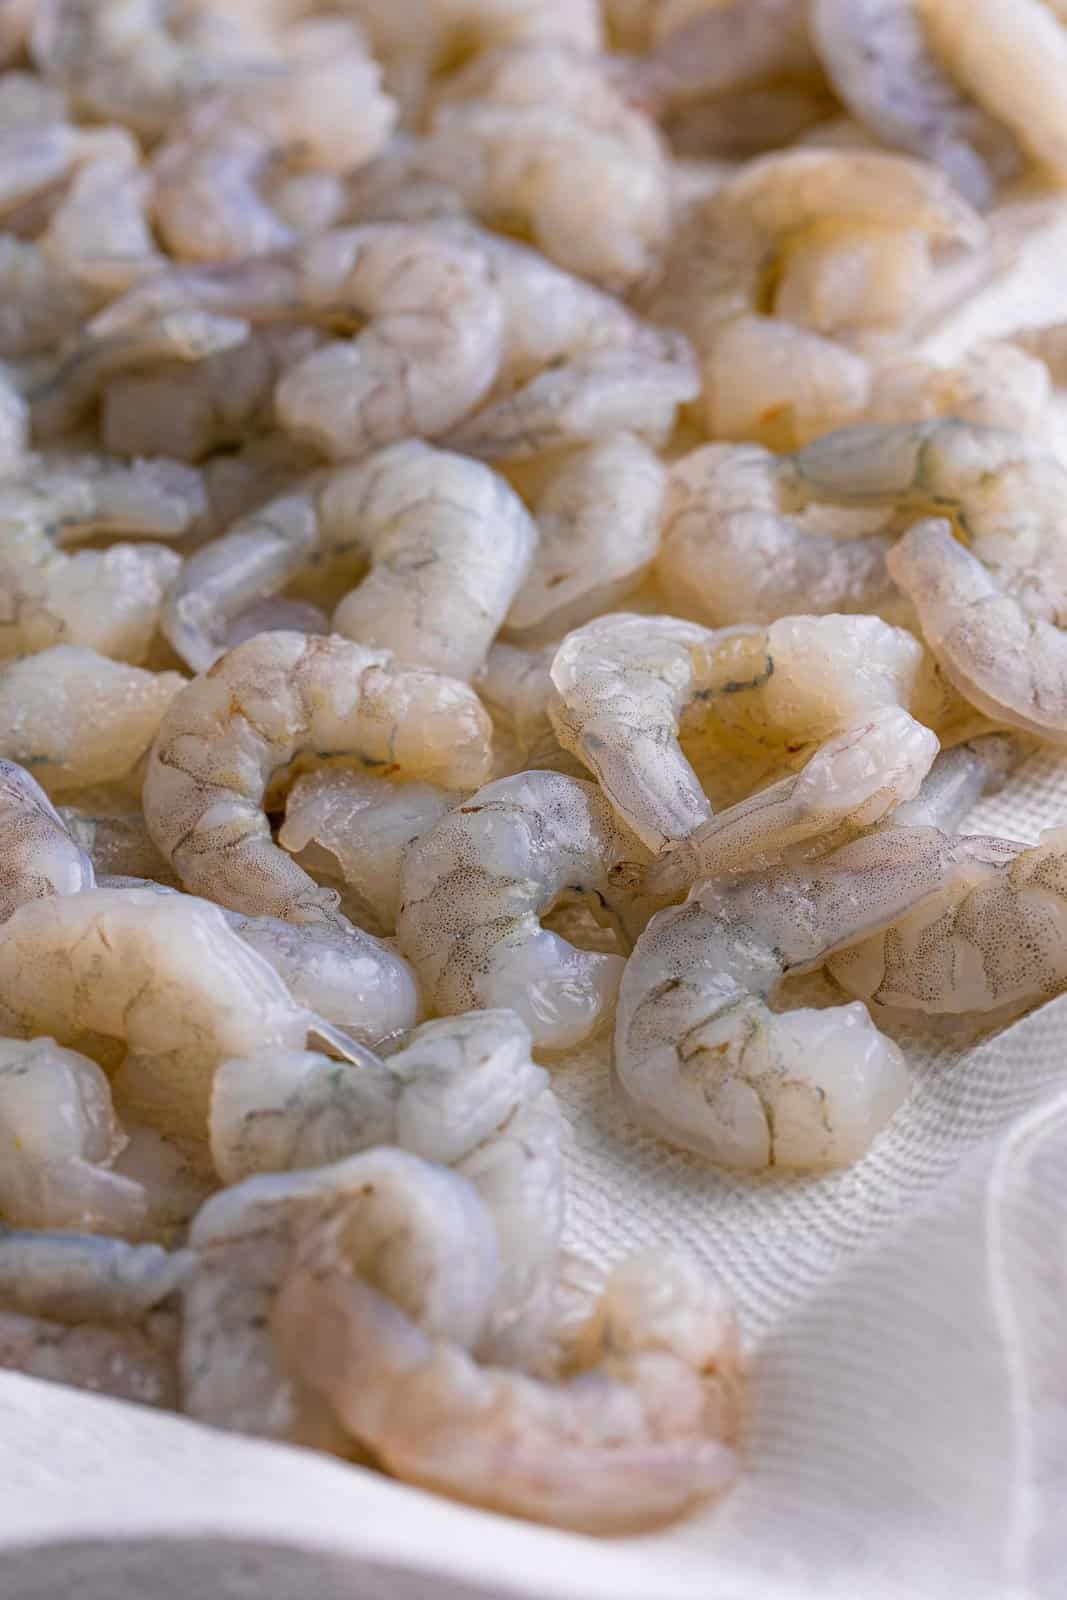 Shrimp being dried on paper towels.